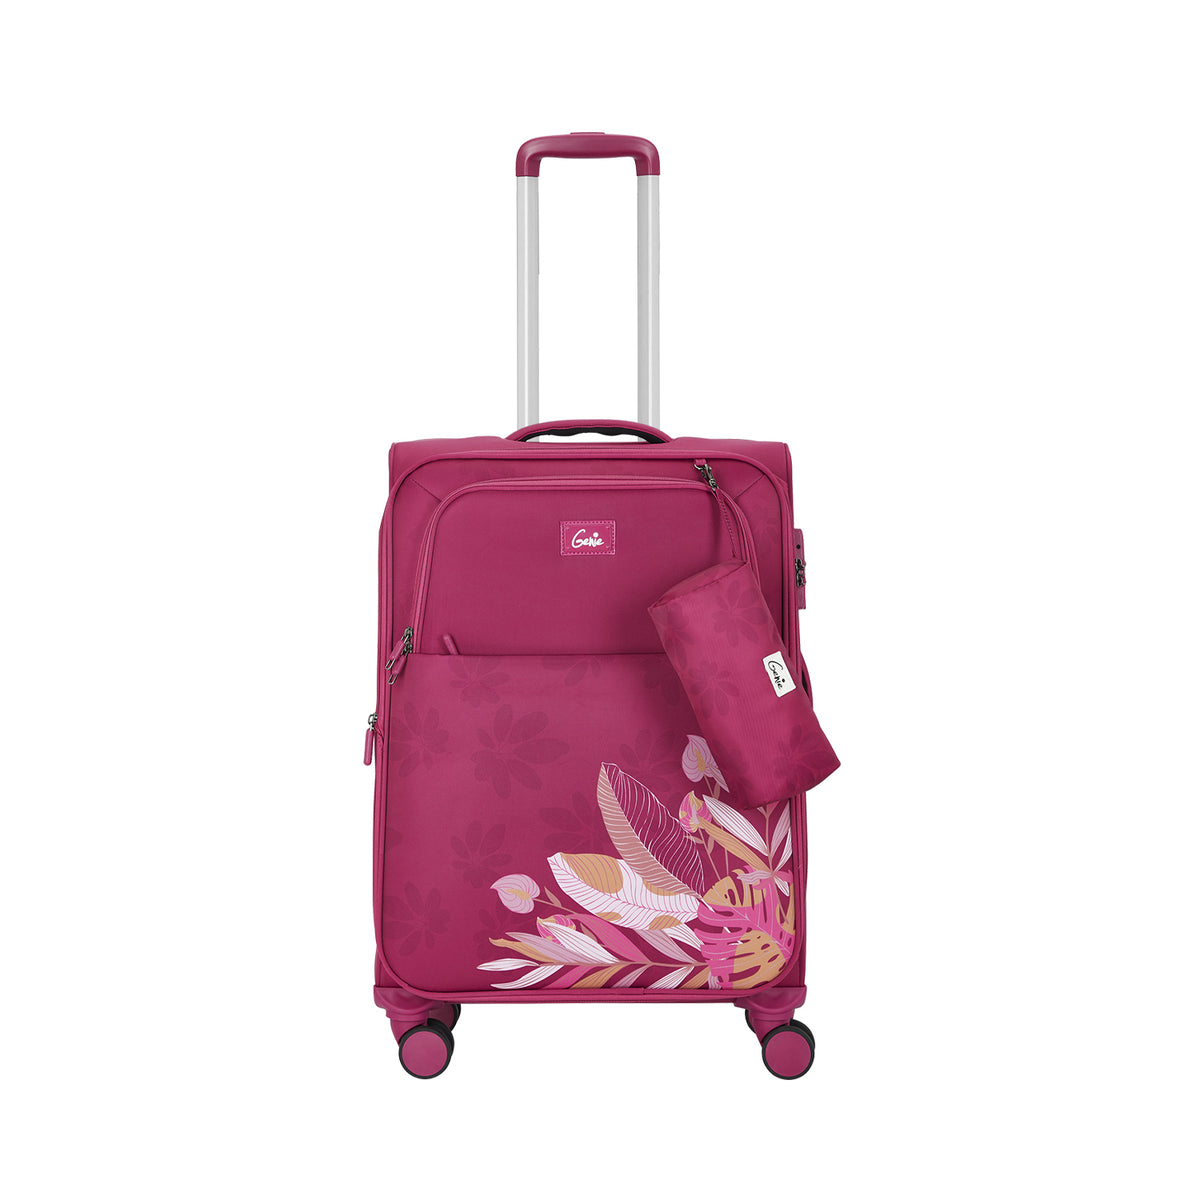 Bloom Soft Luggage- Wine Red